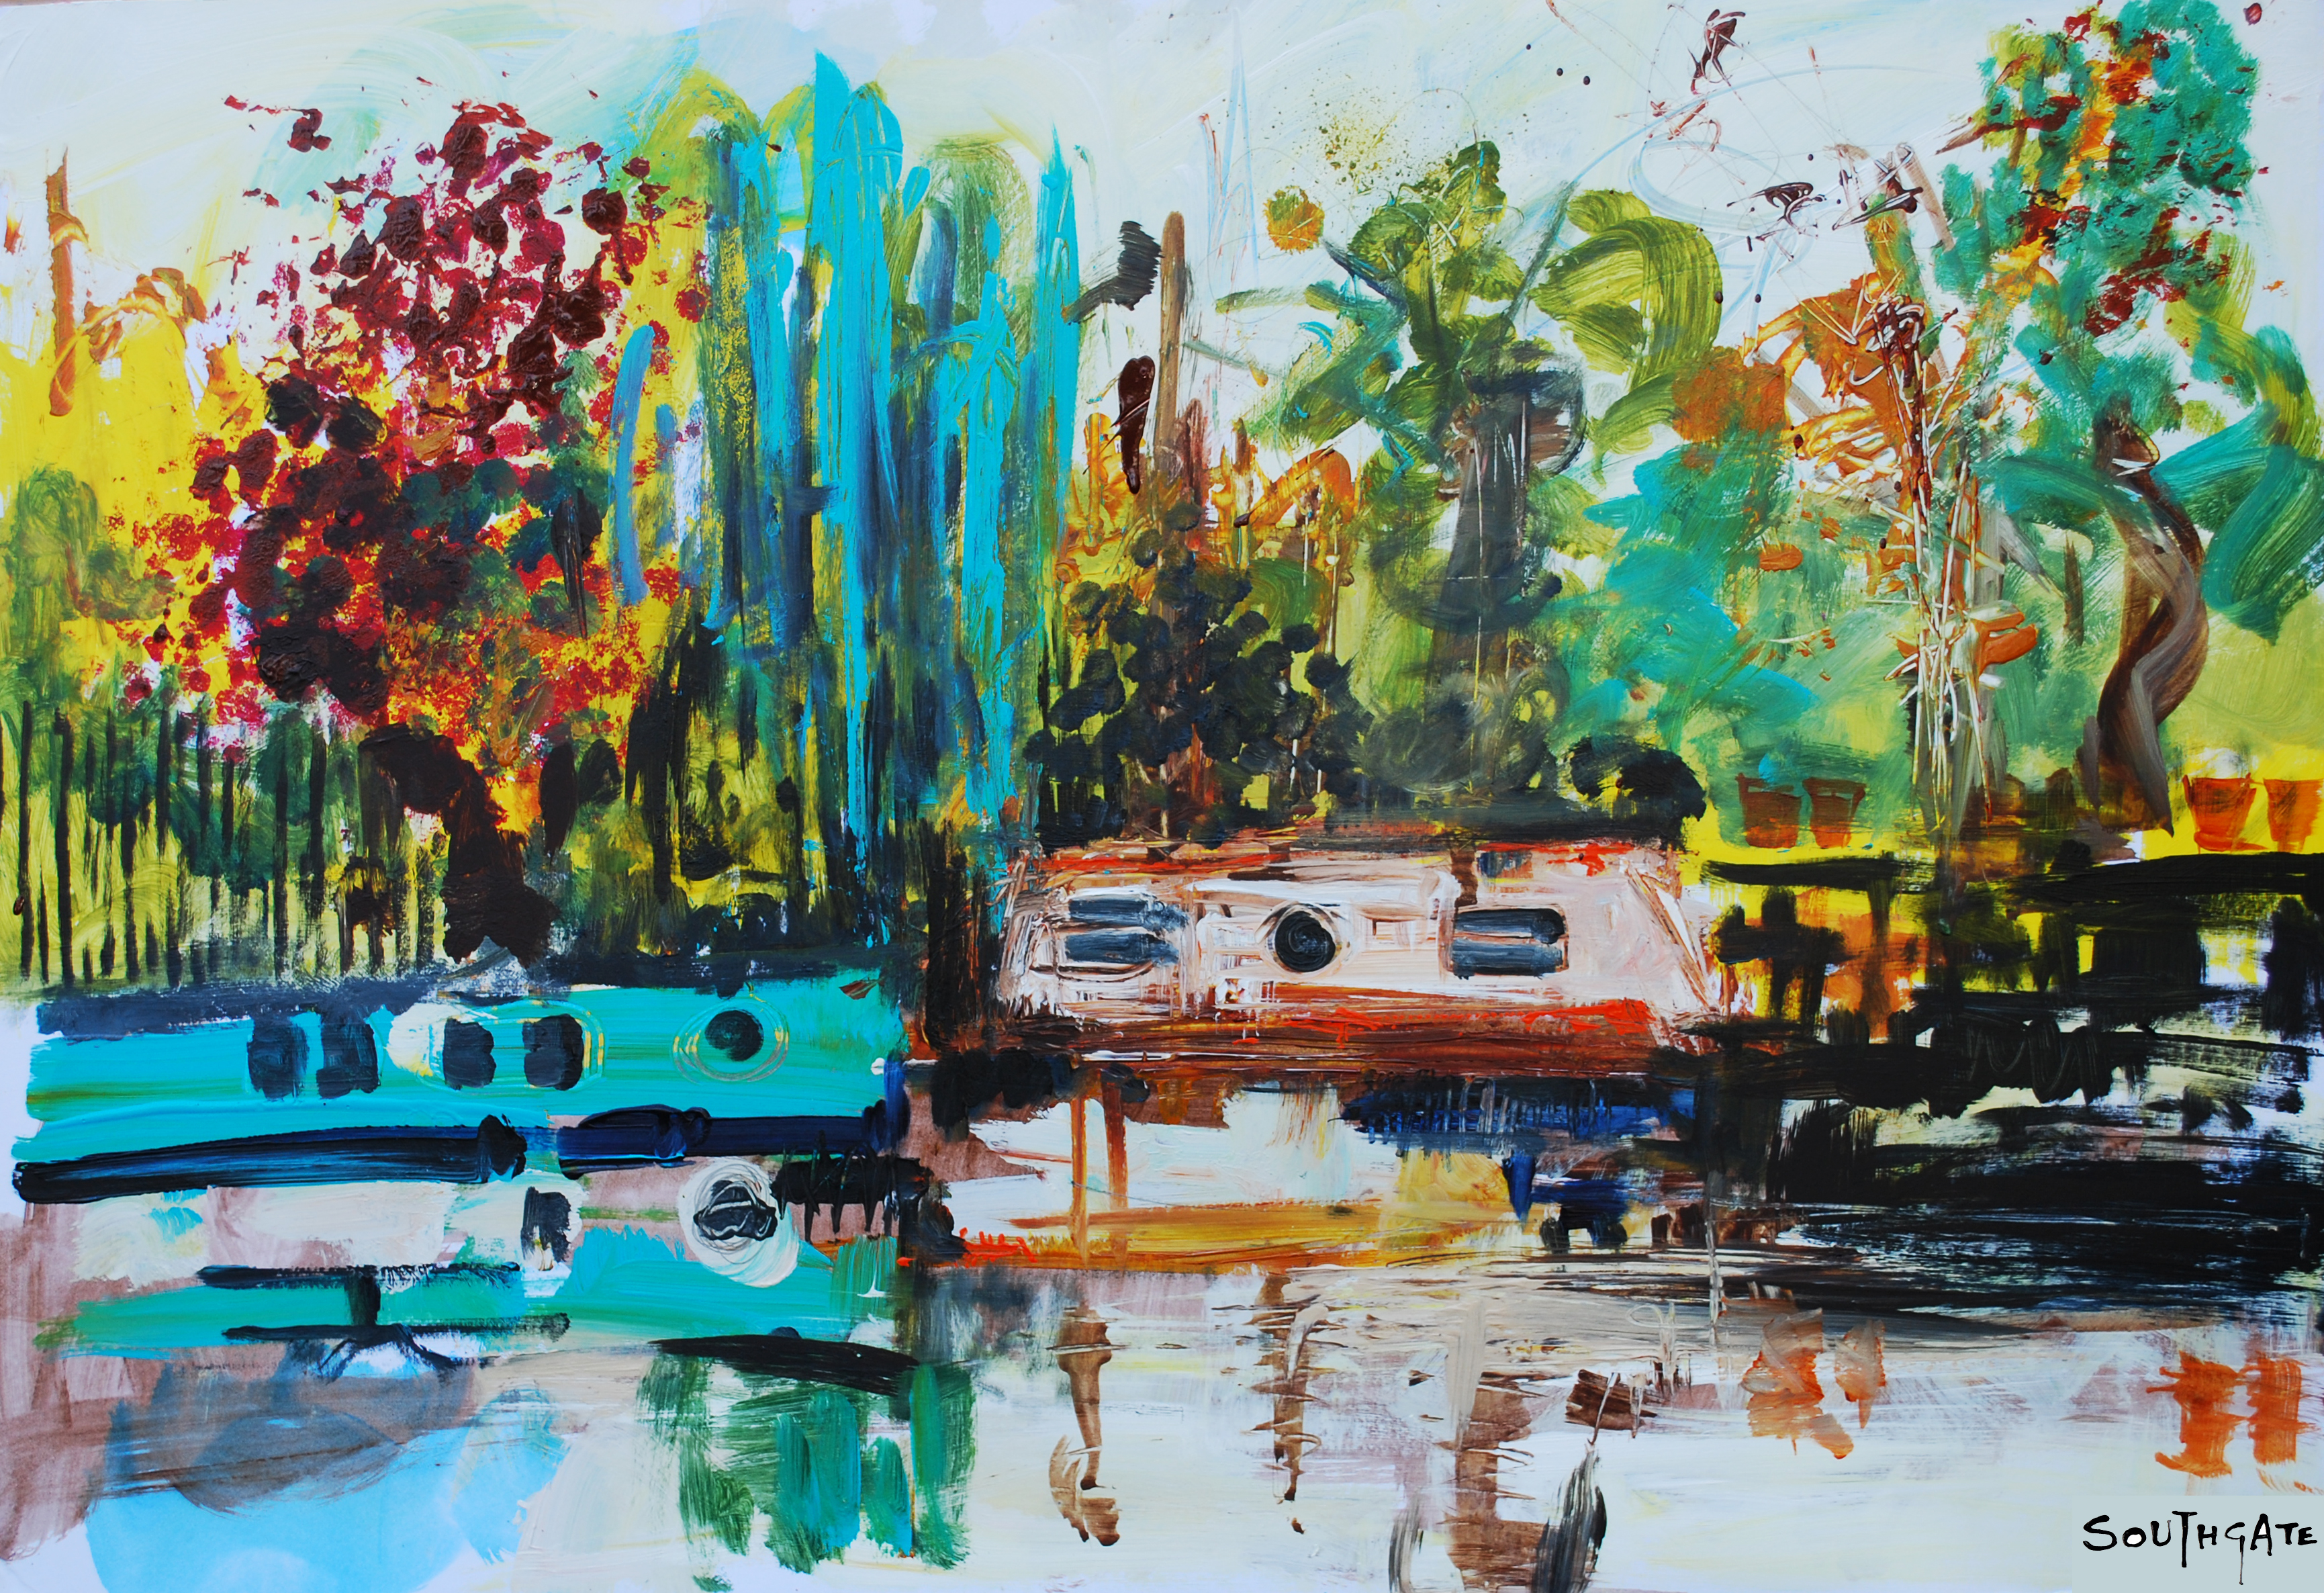 Teal Willow on the Lea, by Gina Southgate